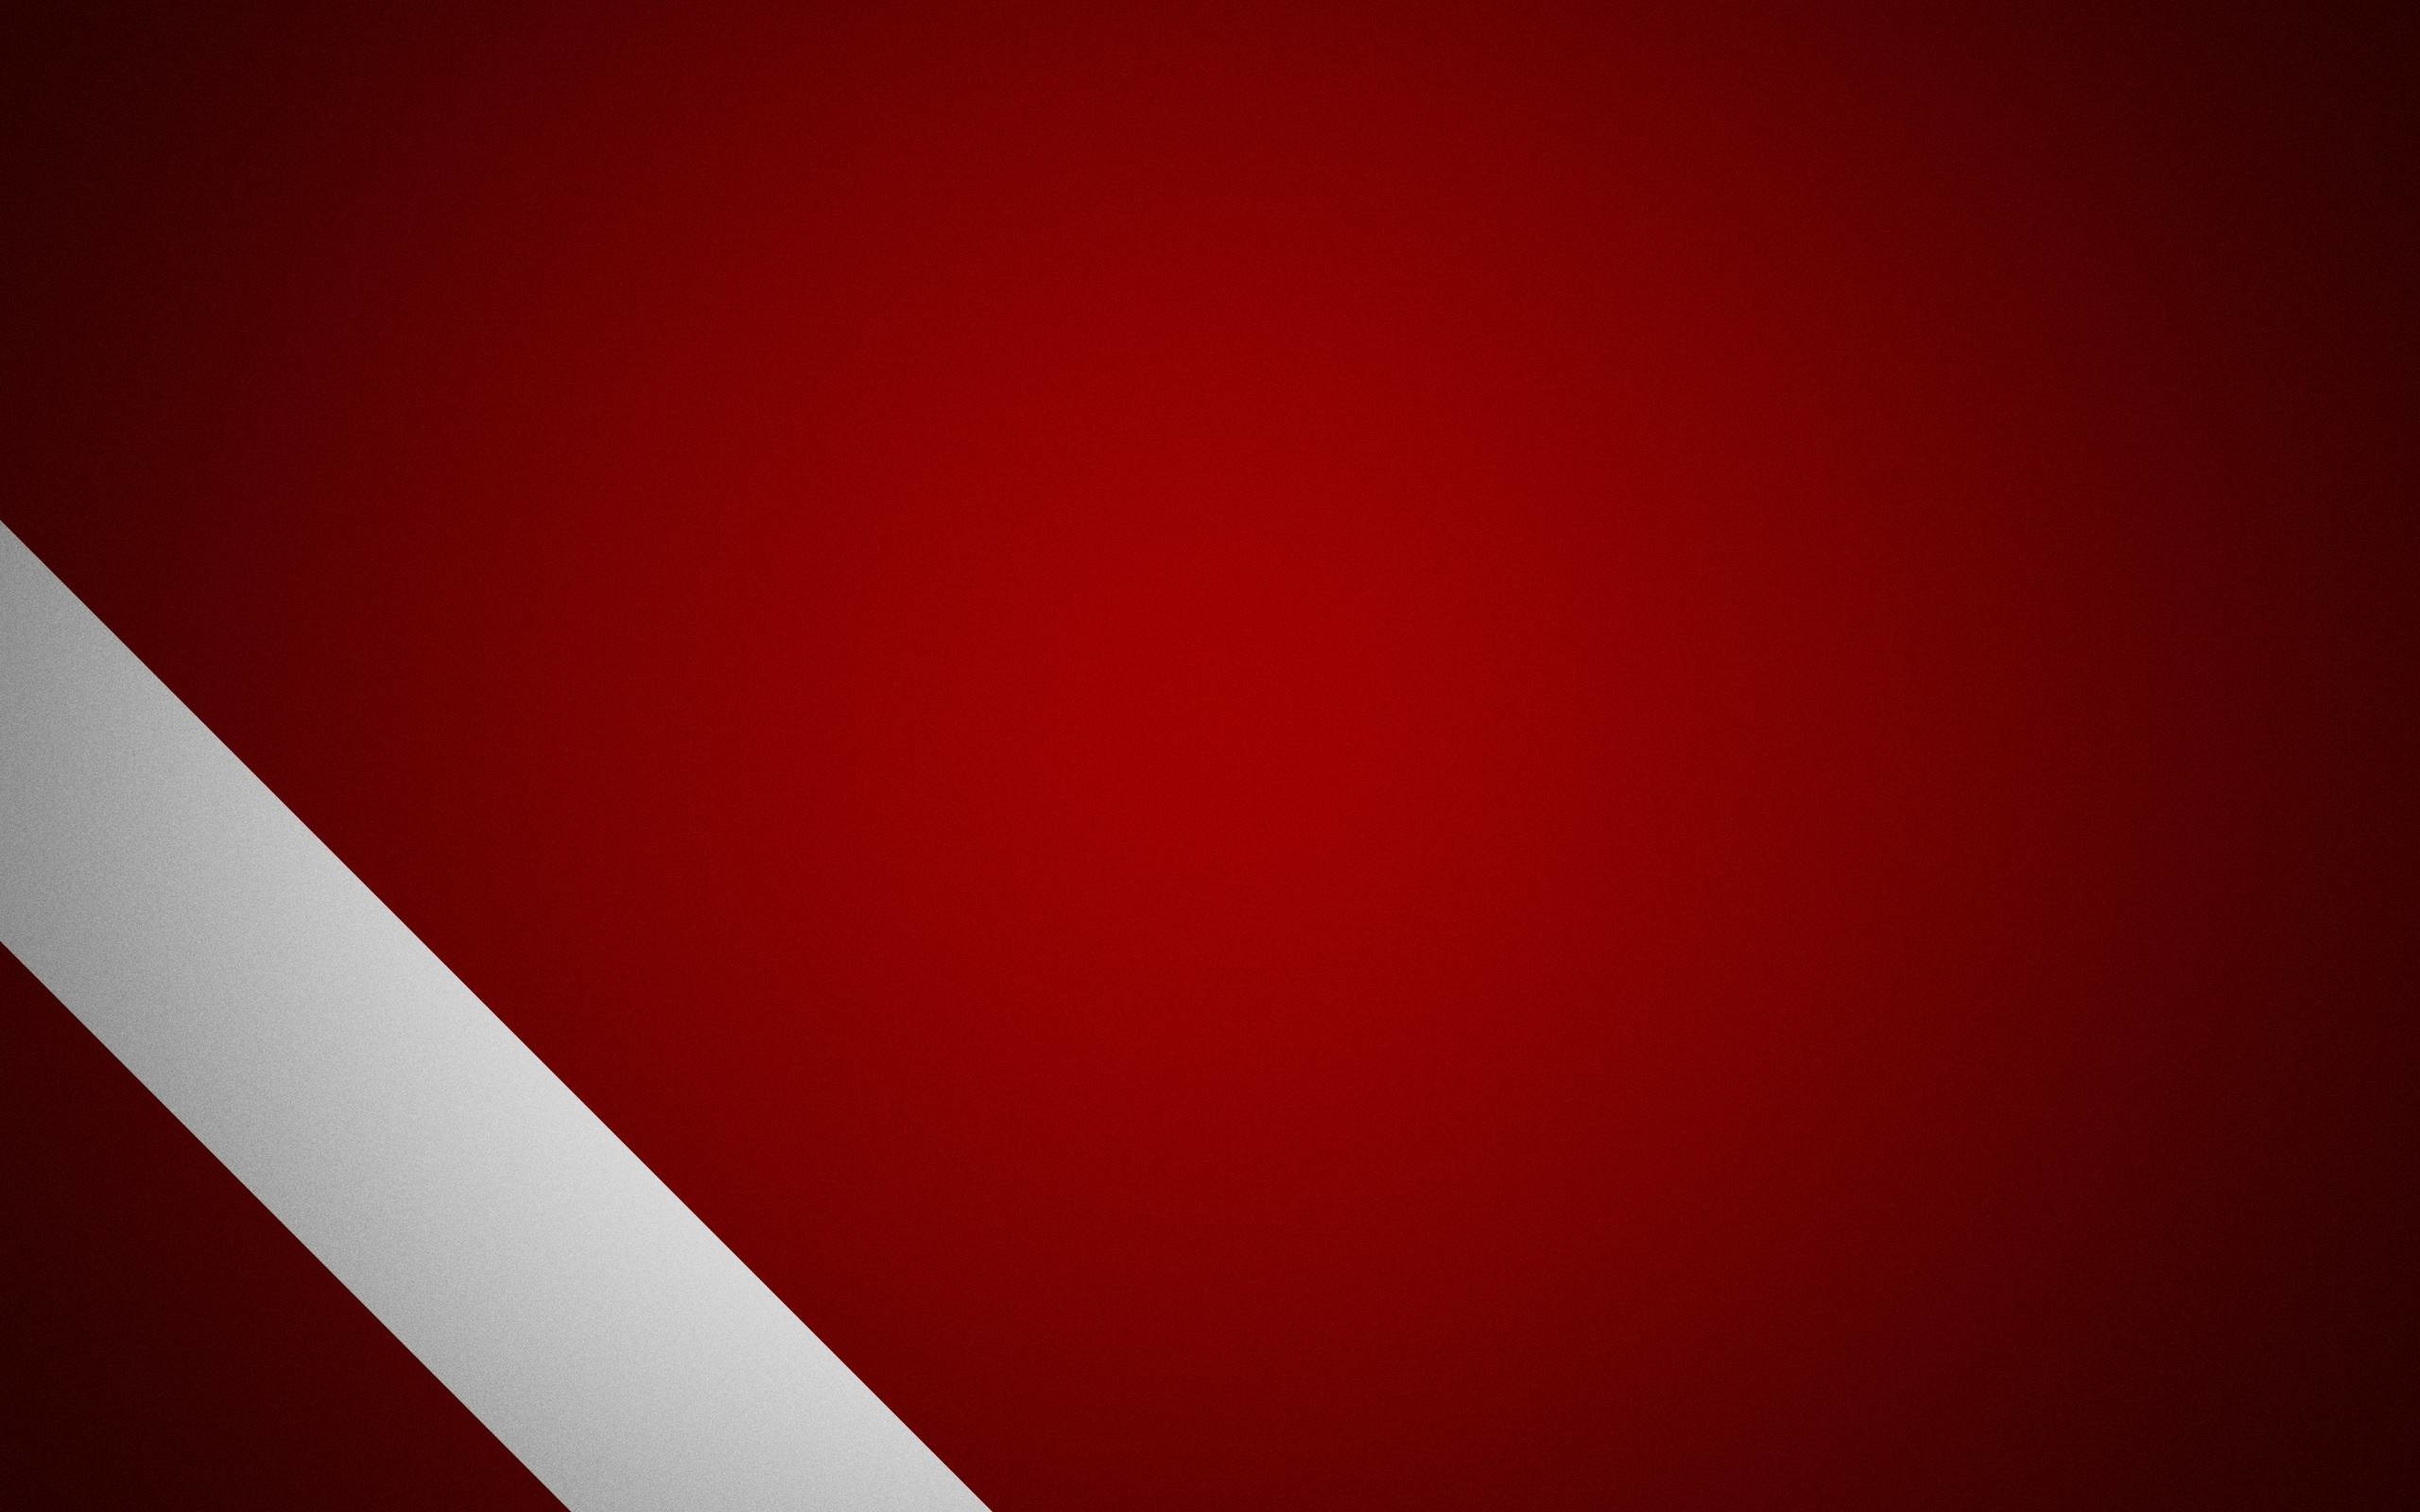 2560x1600 Wallpapers Abstract Red White Amp Black Walls Plox Typeon High